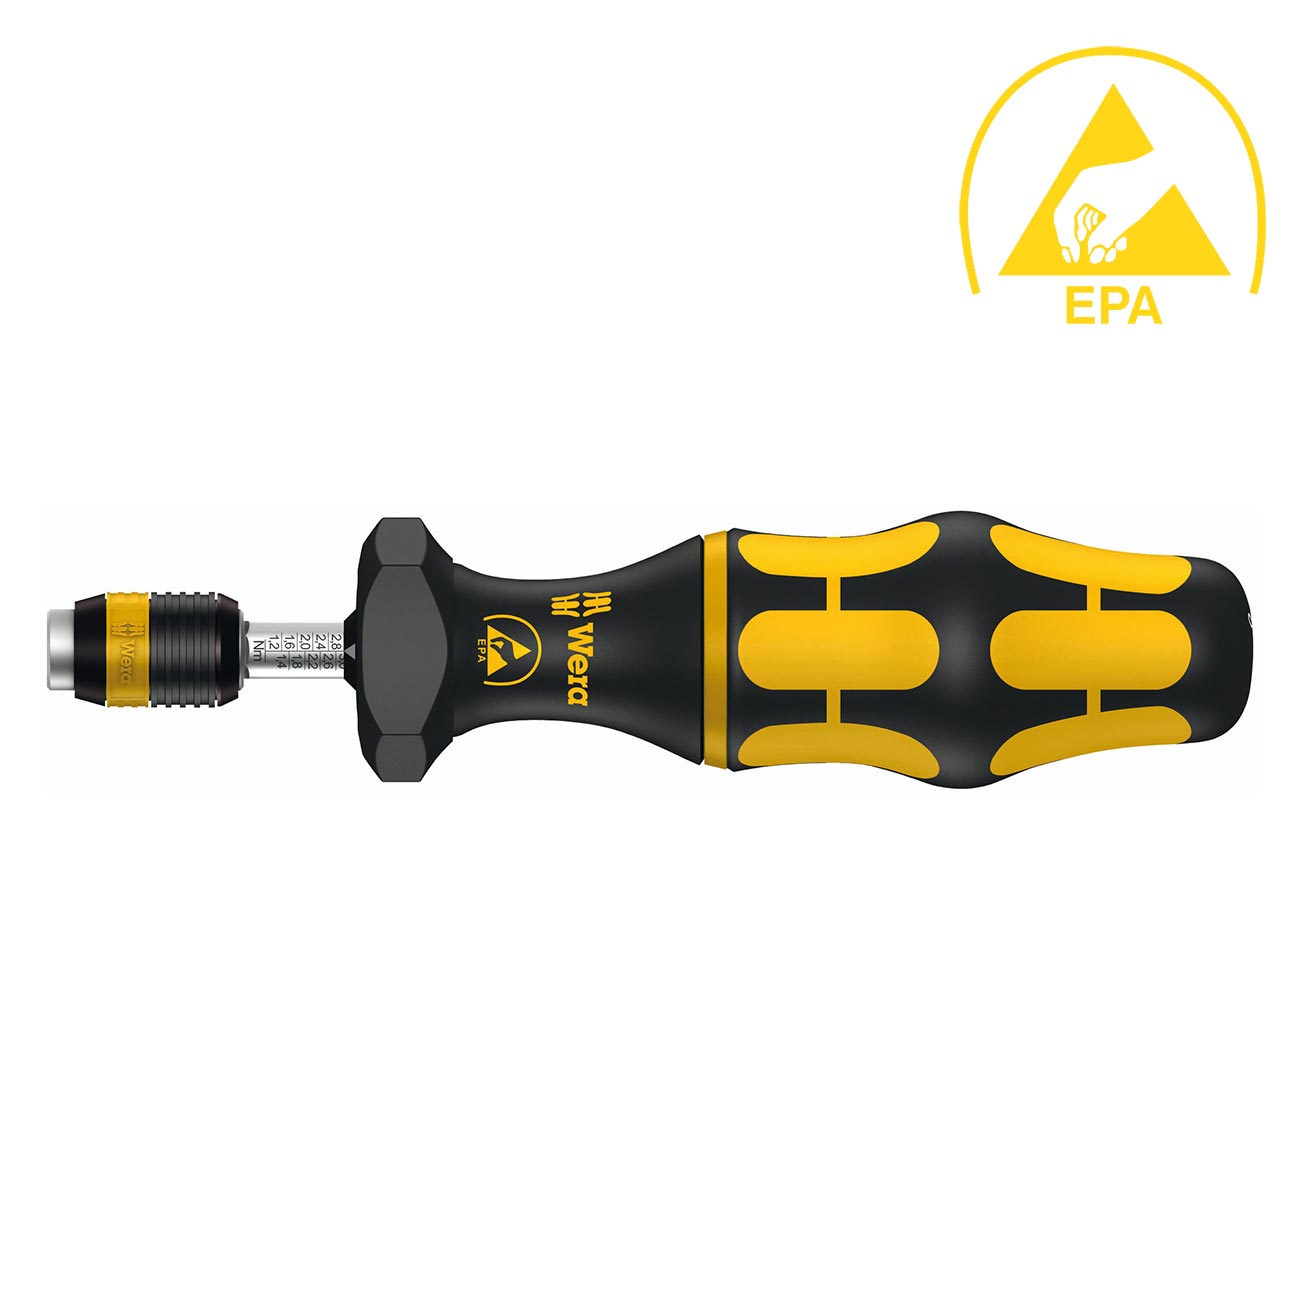 Wera Adjustable ESD Safe Torque Screwdriver with Quick Release Chuck (in. lbs.)